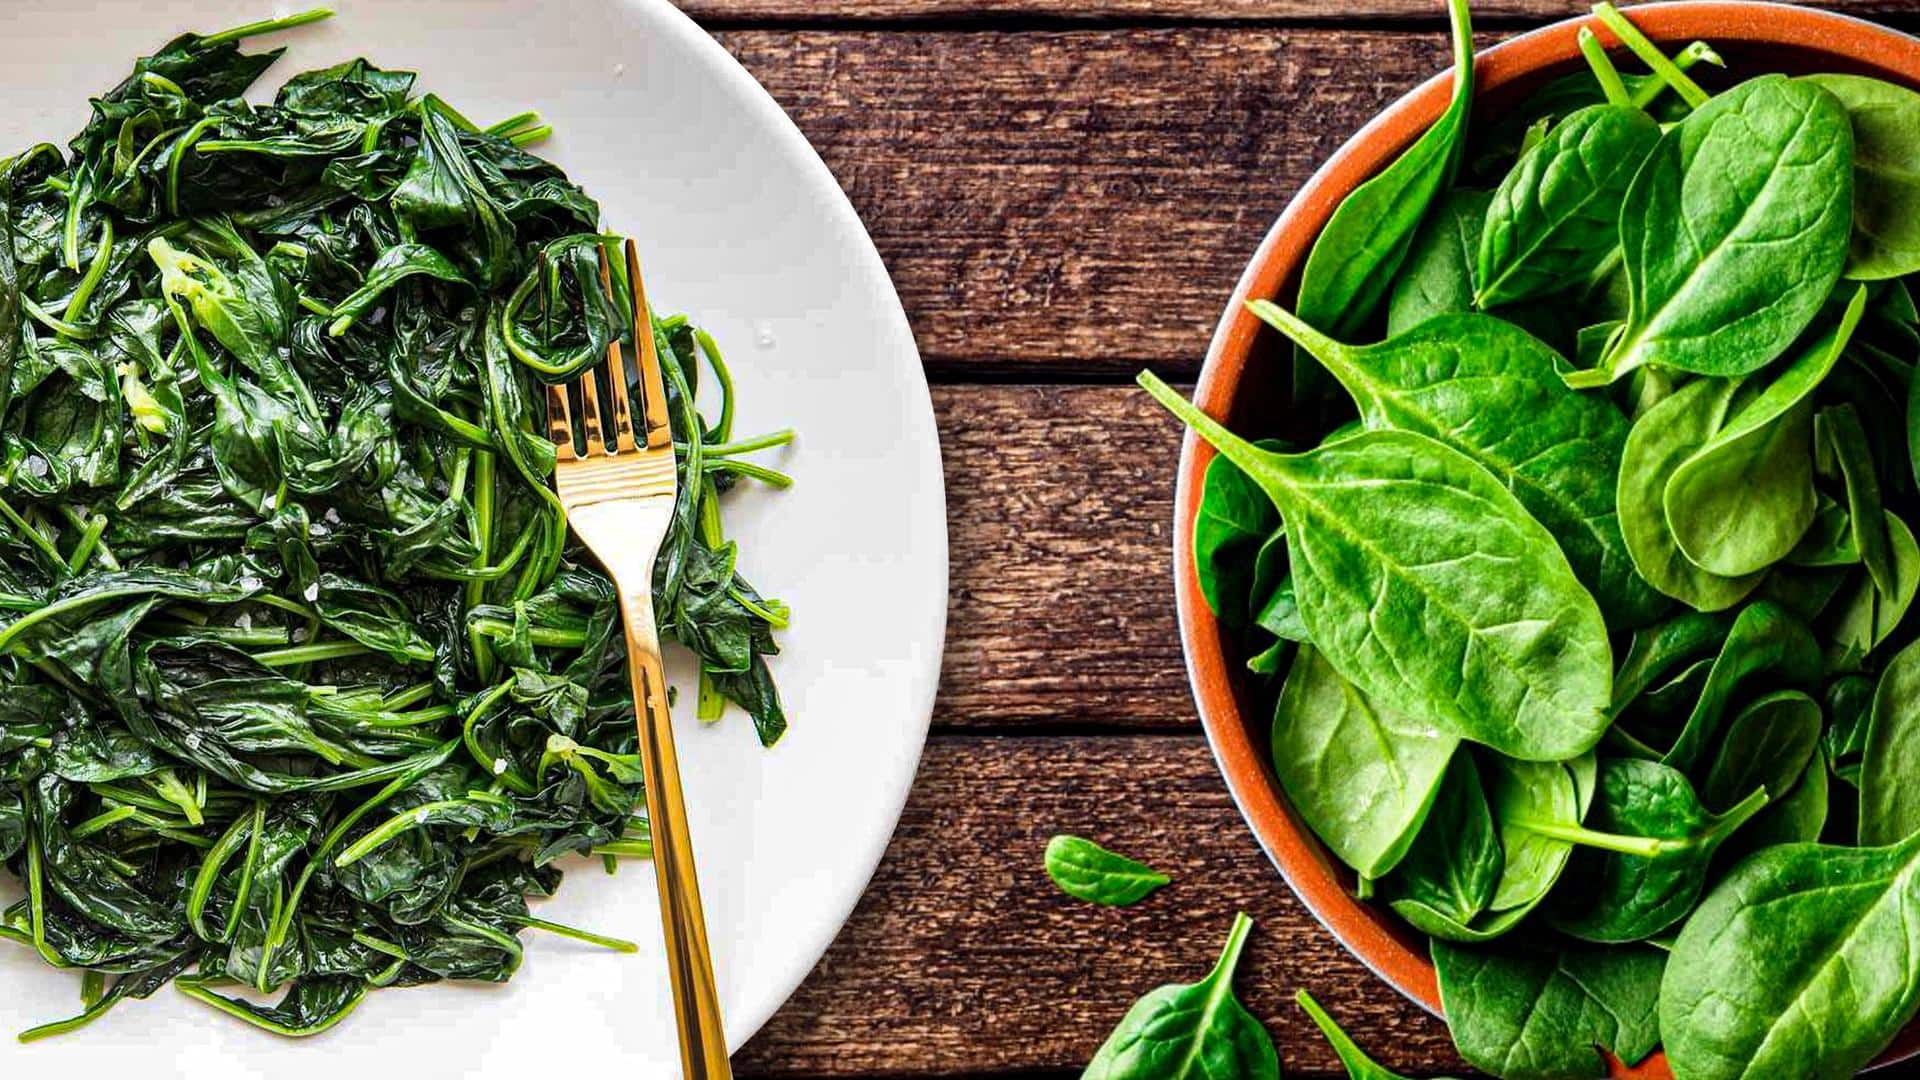 Spinach offers these 5 fantastic health benefits